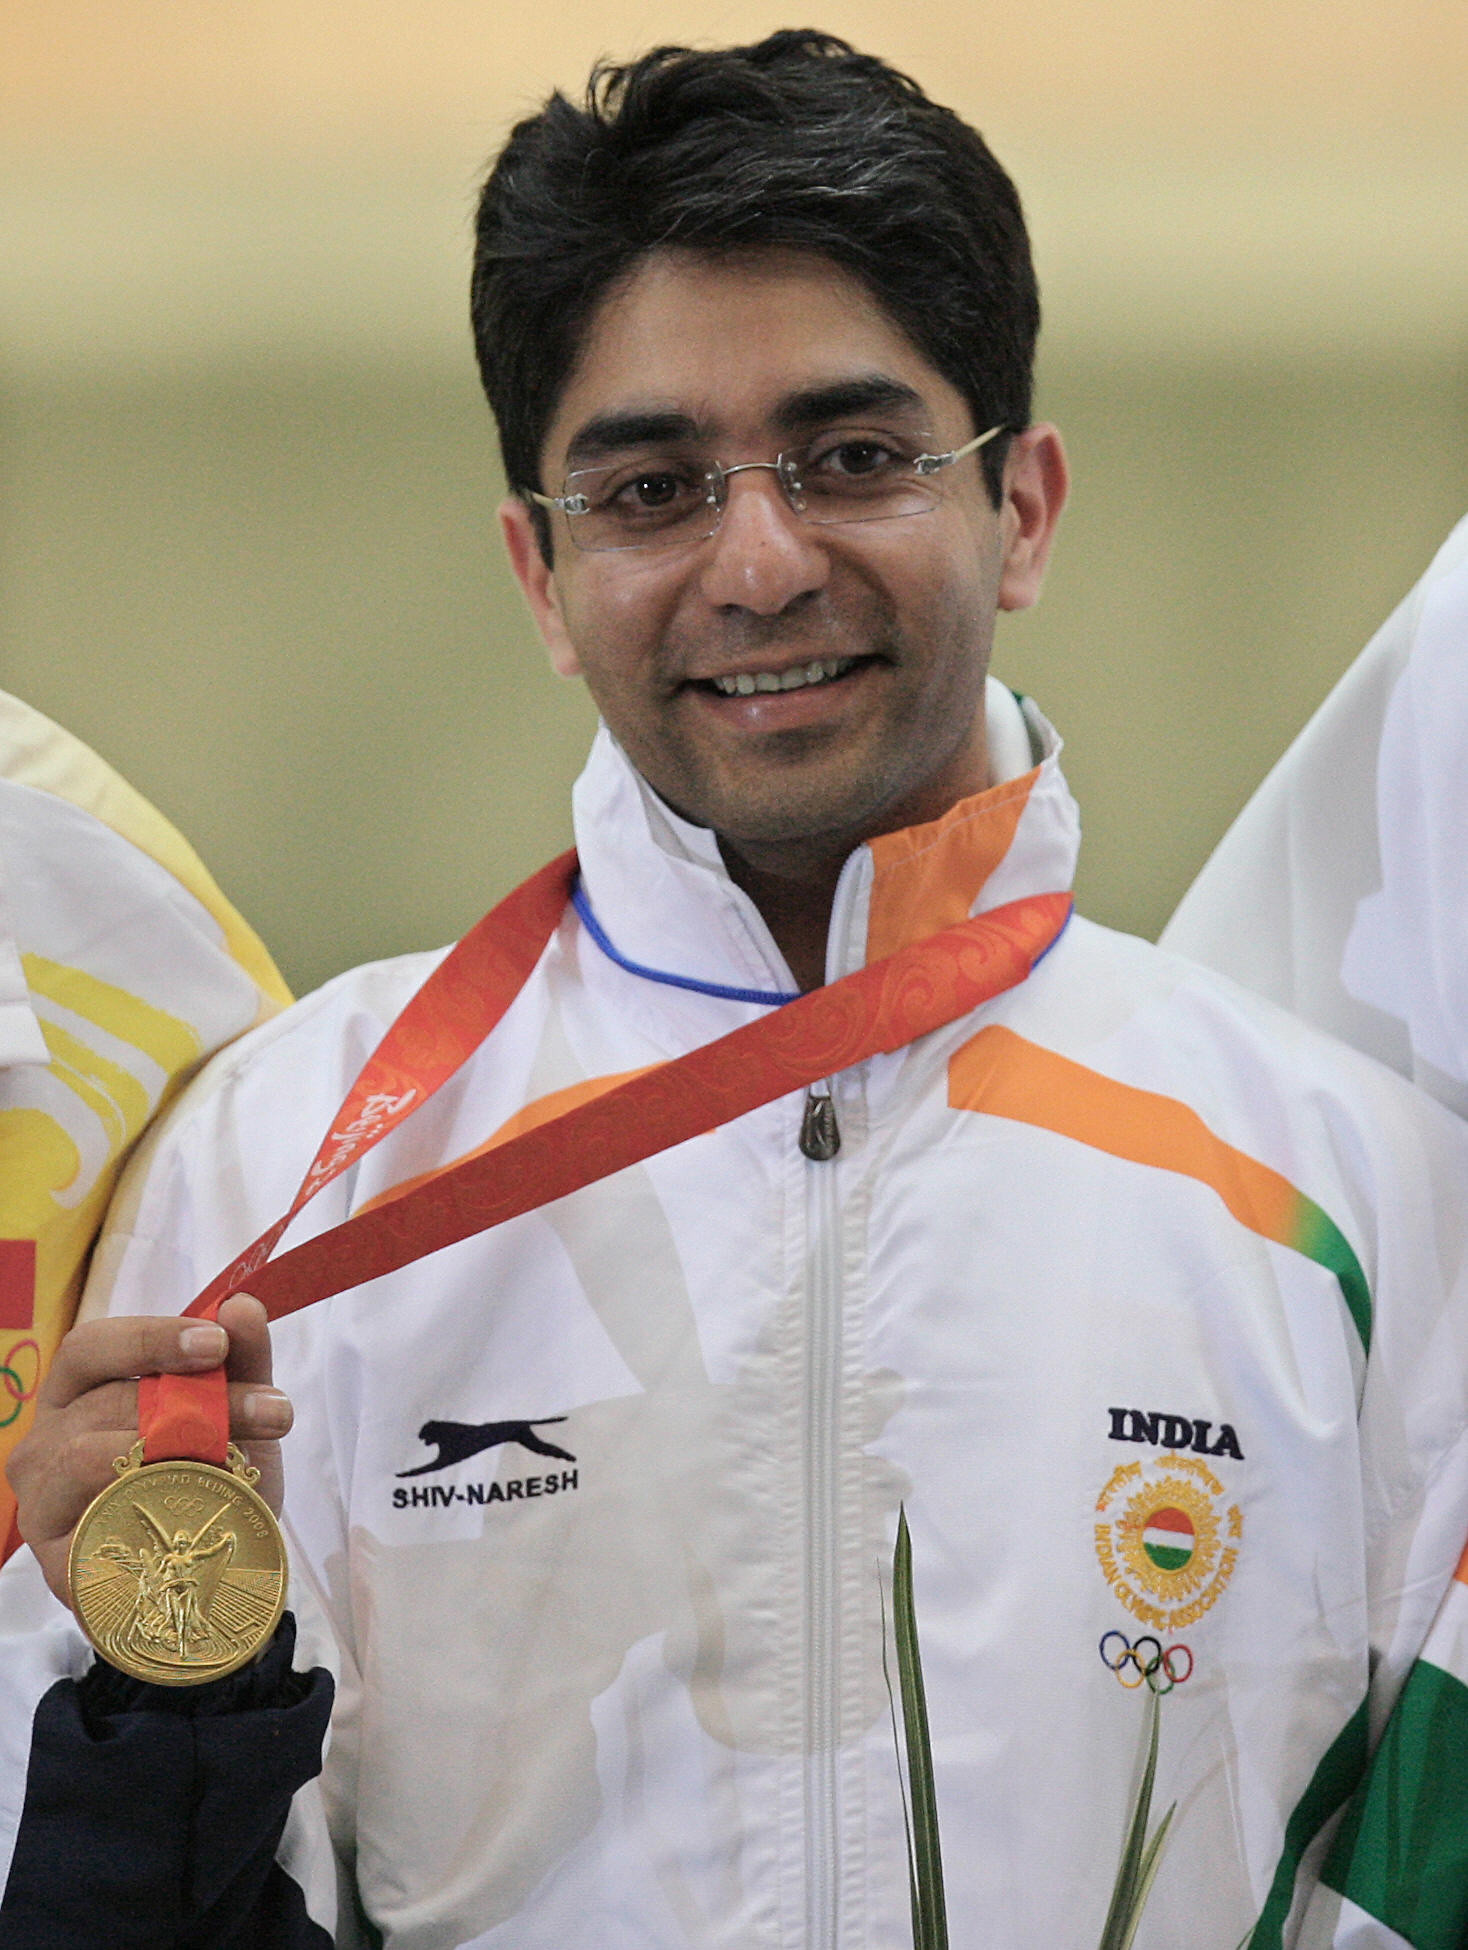 India's last Olympic gold medal came at Beijing 2008 thanks to shooter Abhinav Bindra ©Getty Images